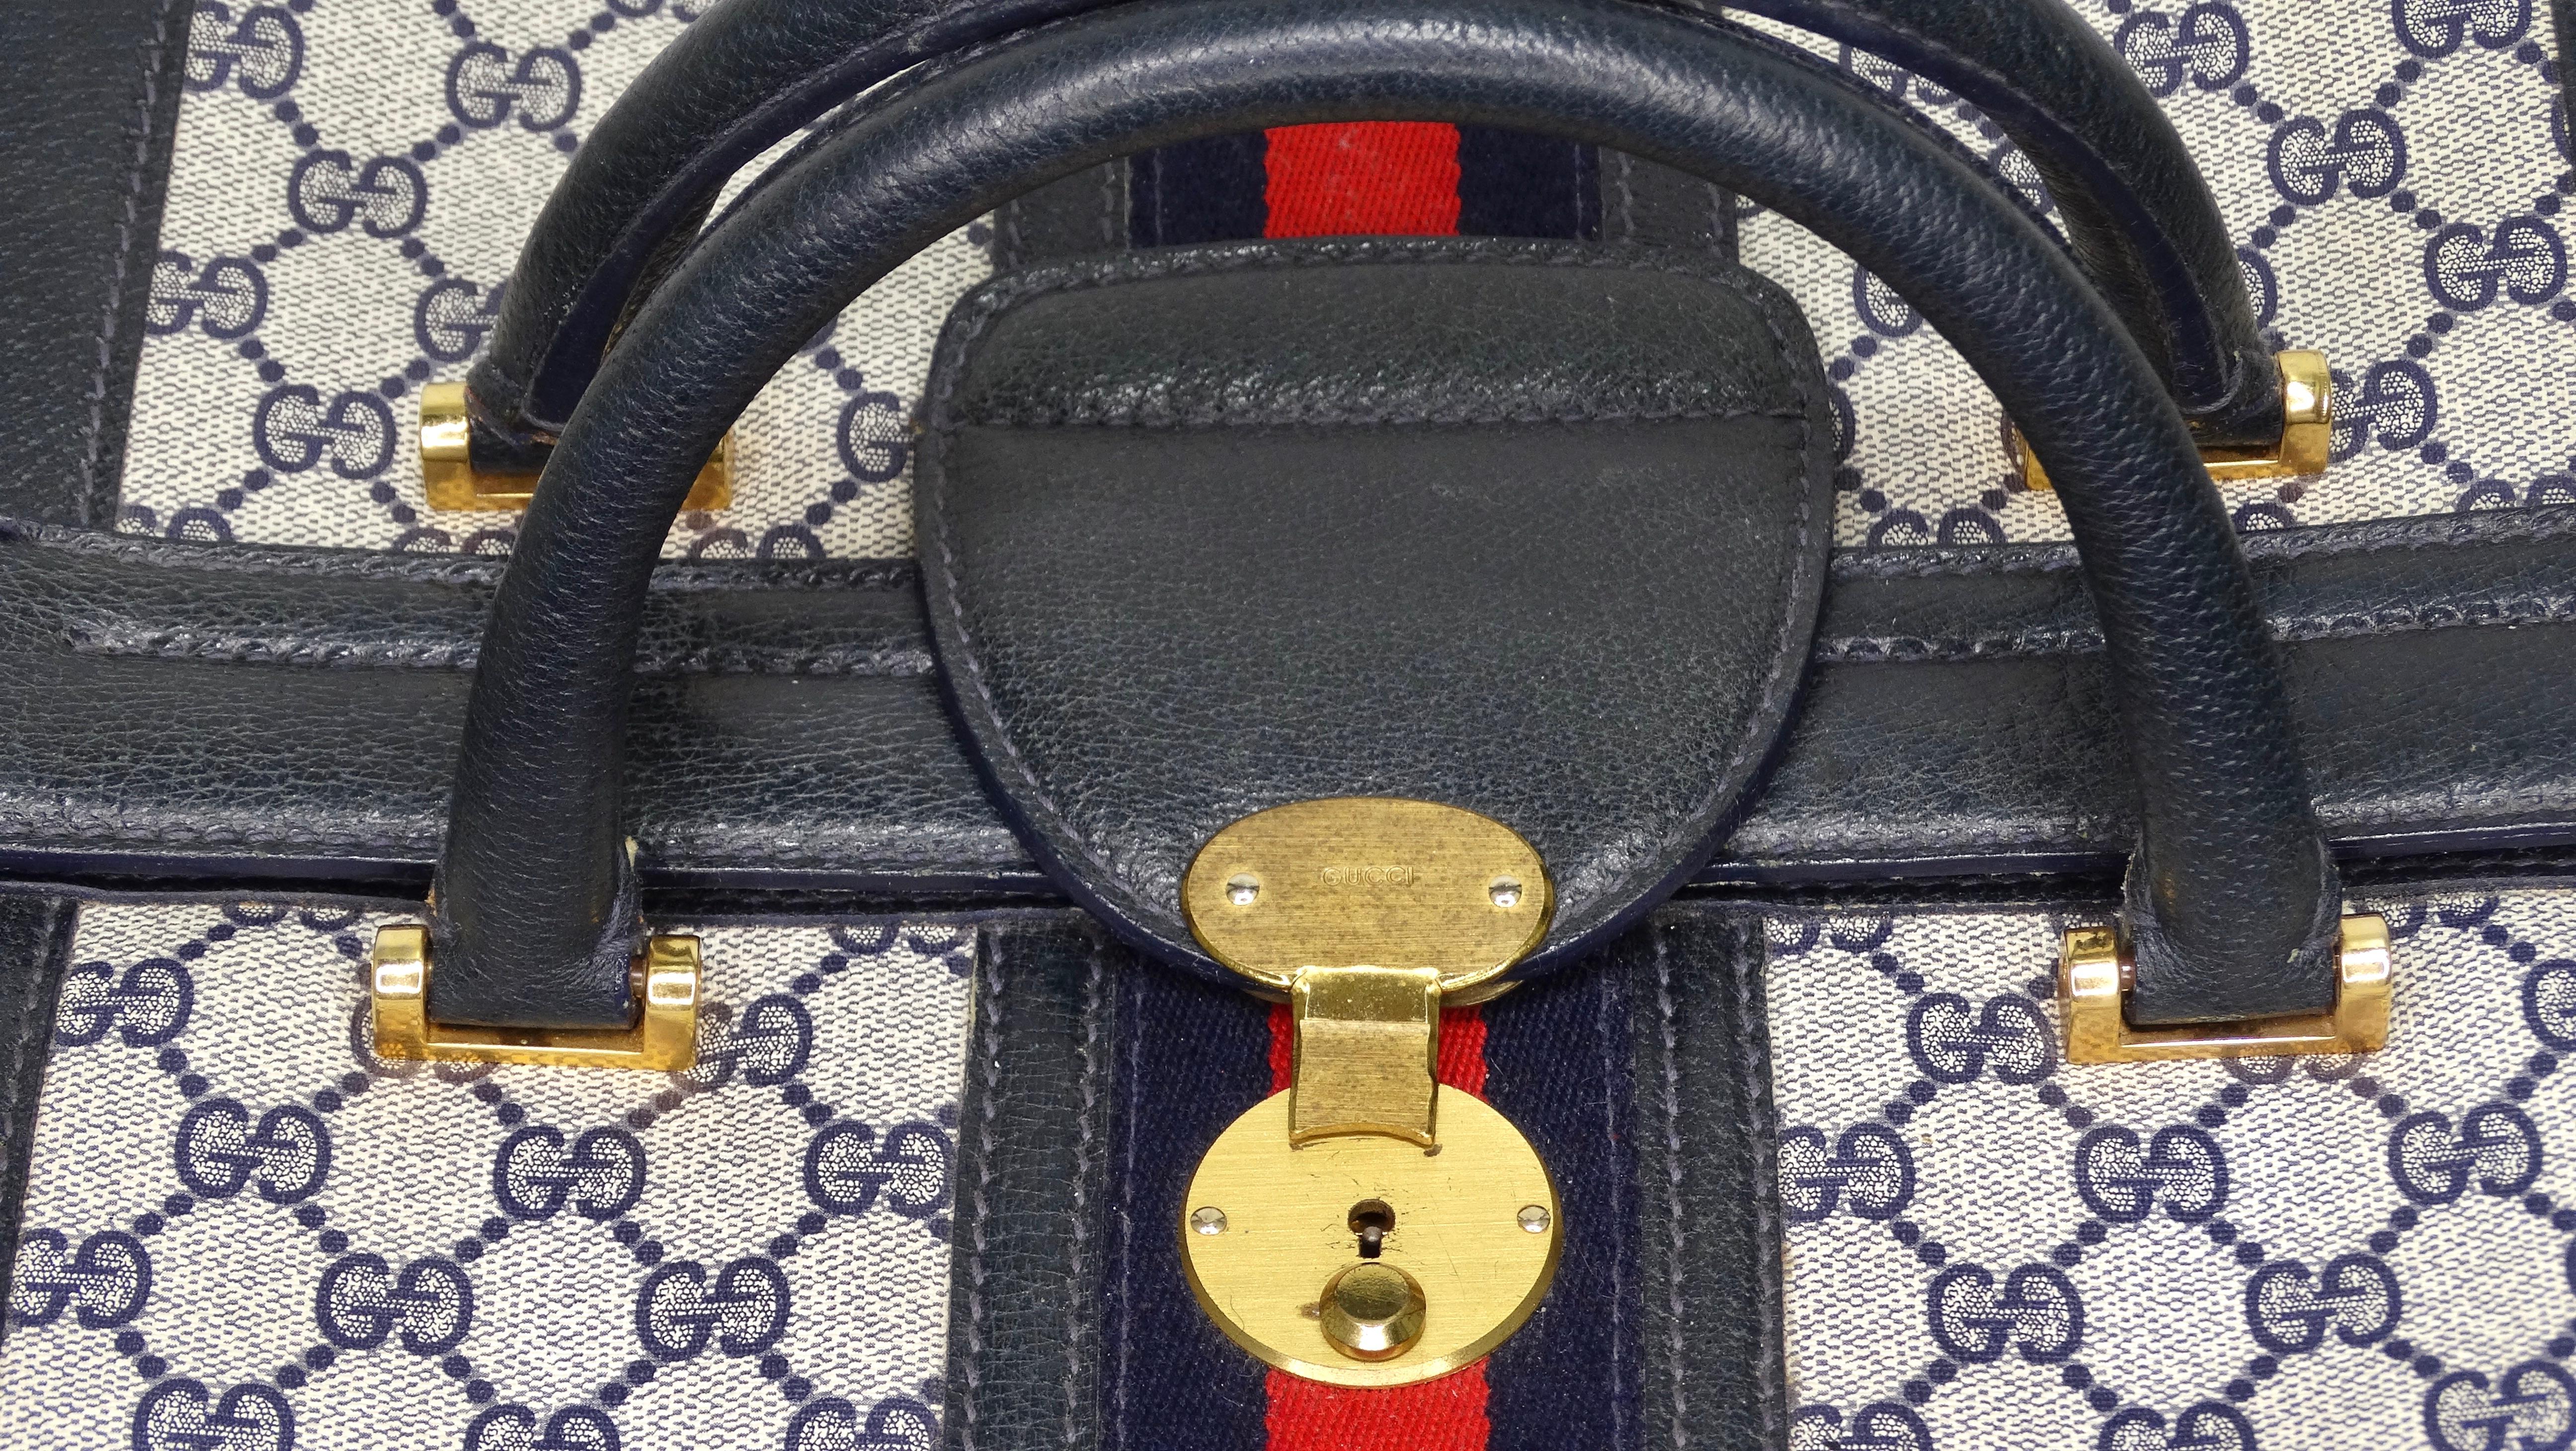 Travel in style in this cool 1980's vintage three-lock train case from the house of Gucci. The exterior is covered in a 'GG' blue and grey monogram canvas and complimented with navy blue leather, gold hardware, and a red and blue stripe. Features a